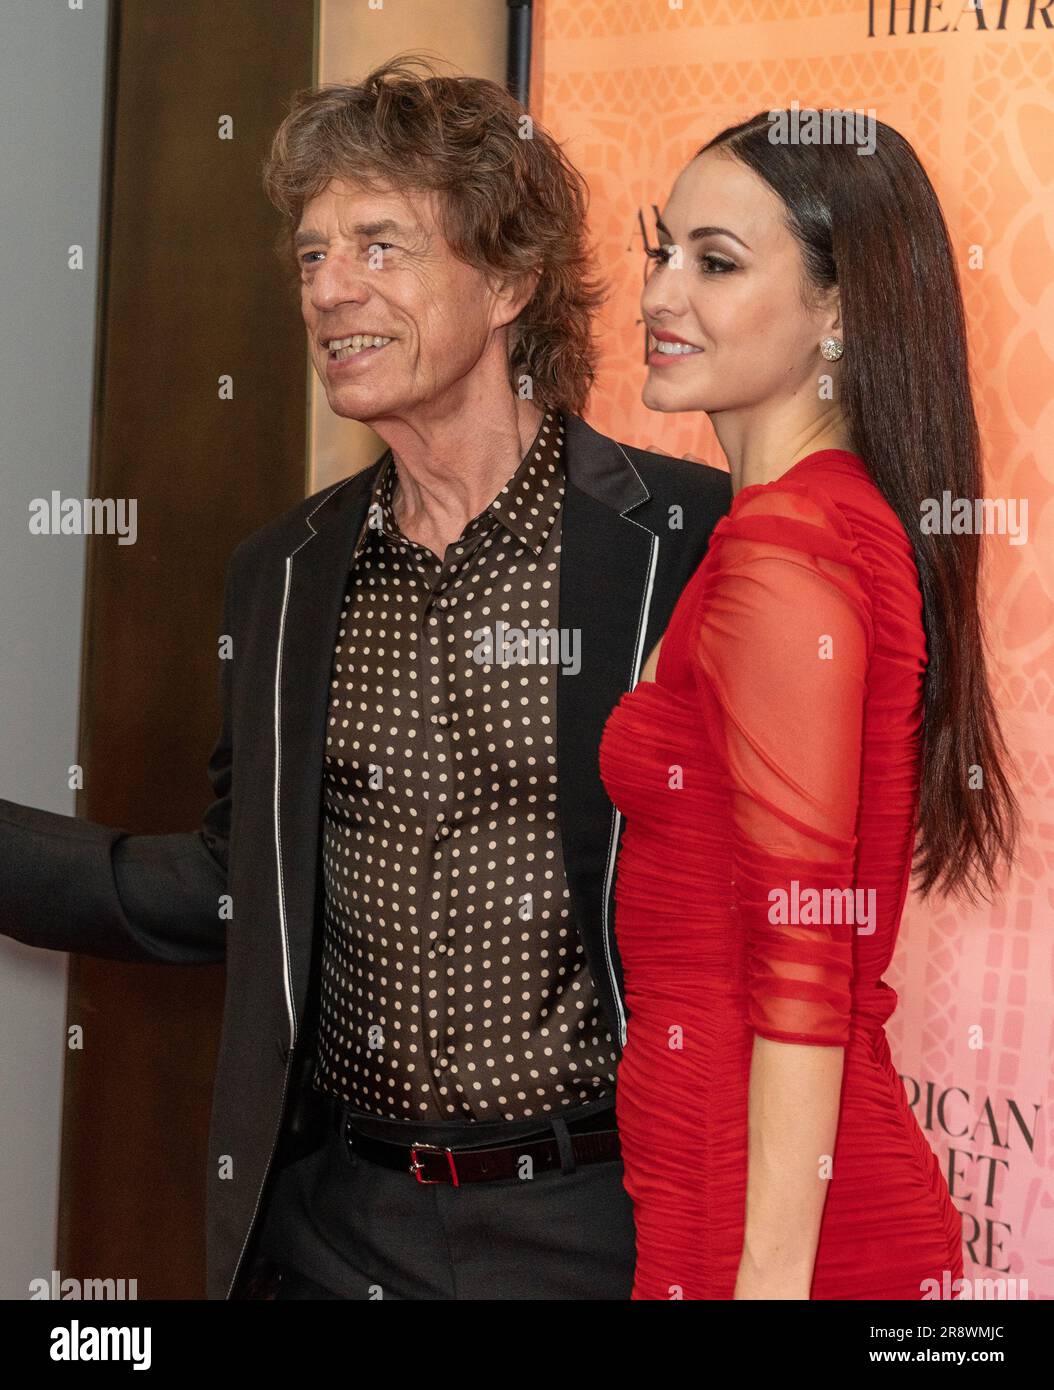 Mick Jagger and Melanie Hamrick attend 2023 American Ballet Theatre's June Gala and Premiere of 'Like Water For Chocolate' in New York on June 22, 2023 at The Metropolitan Opera House Stock Photo